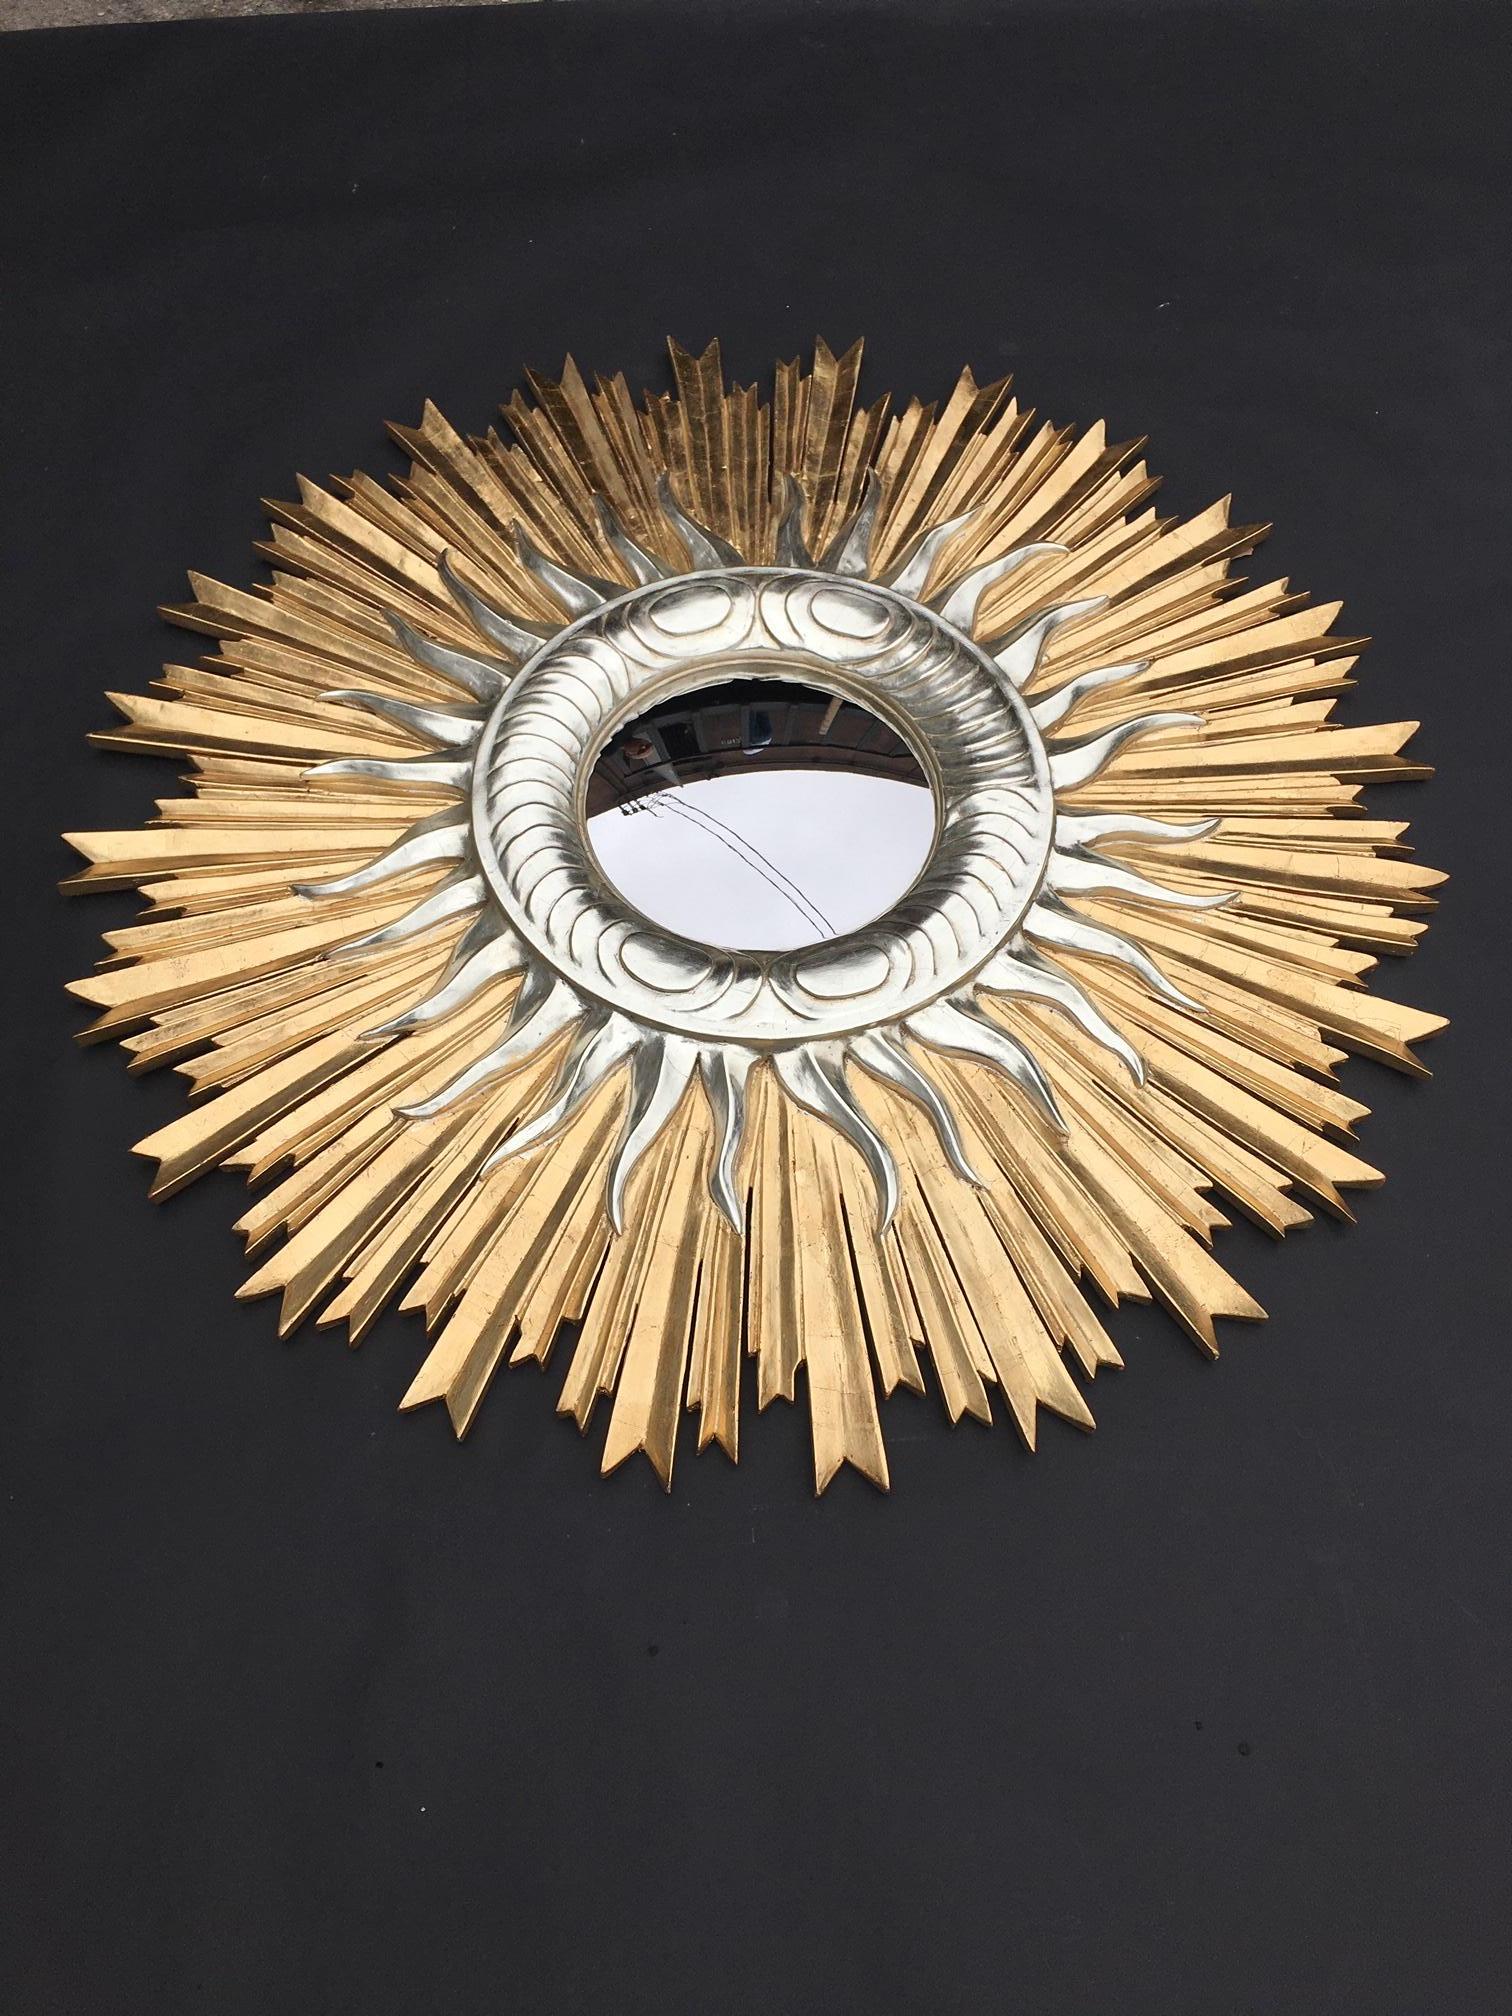 Large Italian hand carved sunburst mirror with yellow and white gold, 1960s, Italy.